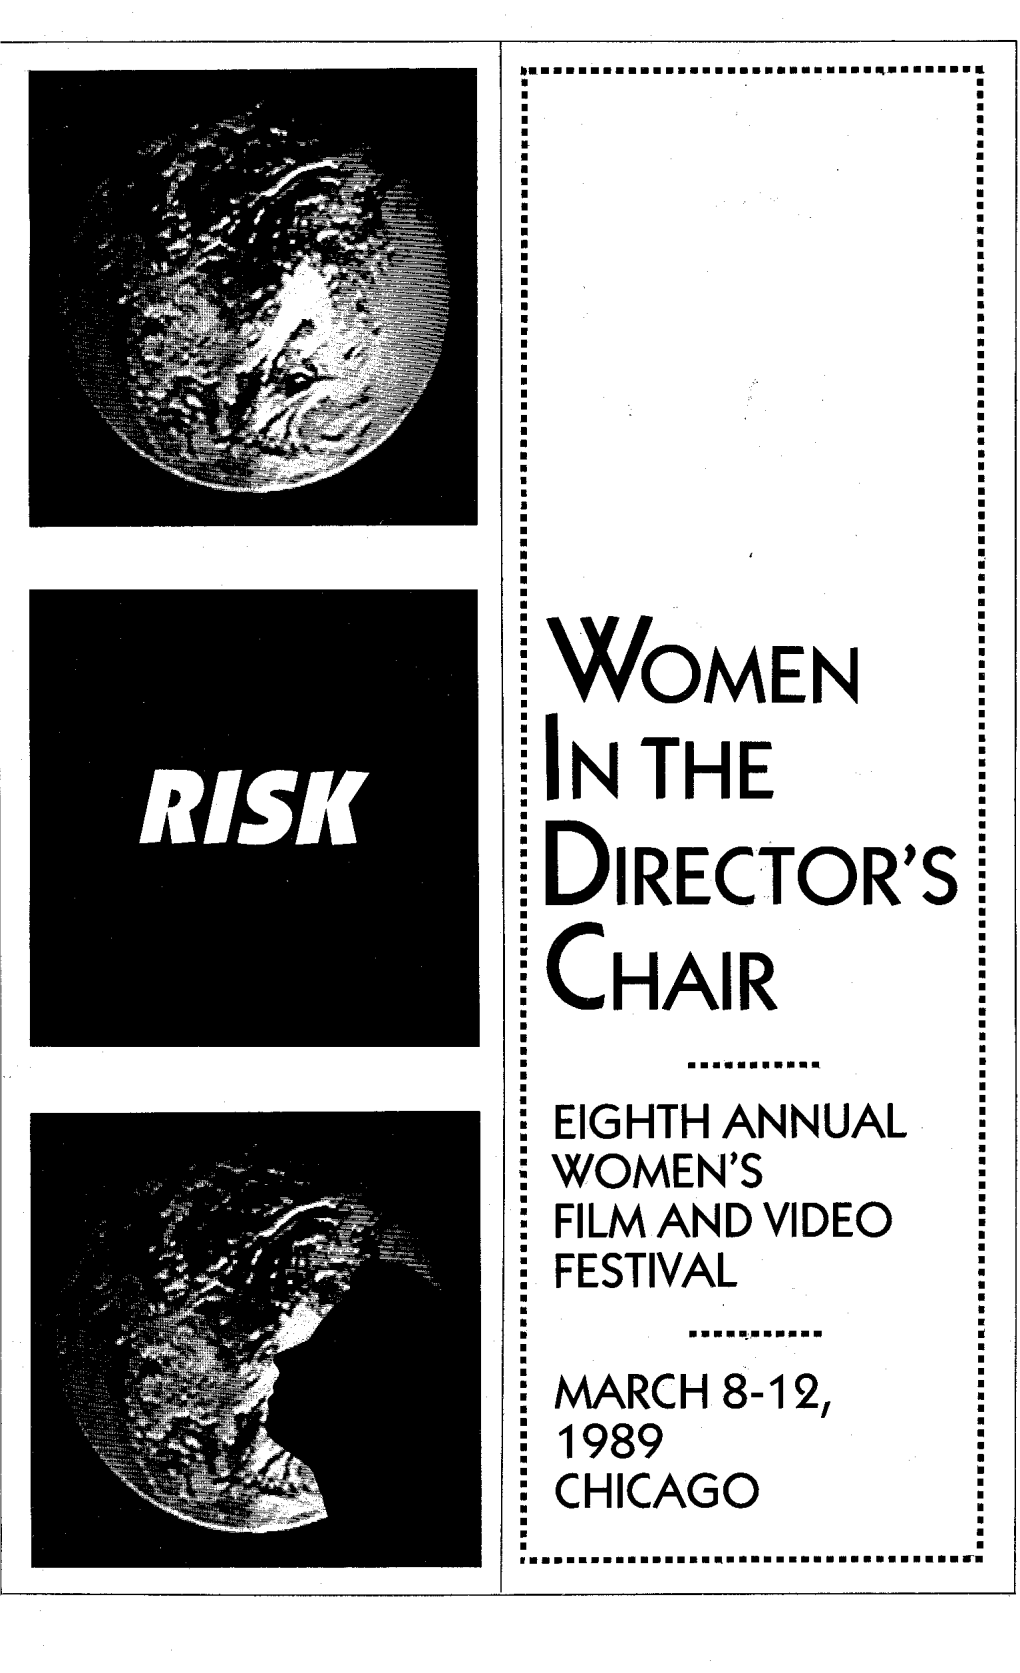 The EIGHTH ANNUAL WOMEN's FILM and VIDEO FESTIVAL